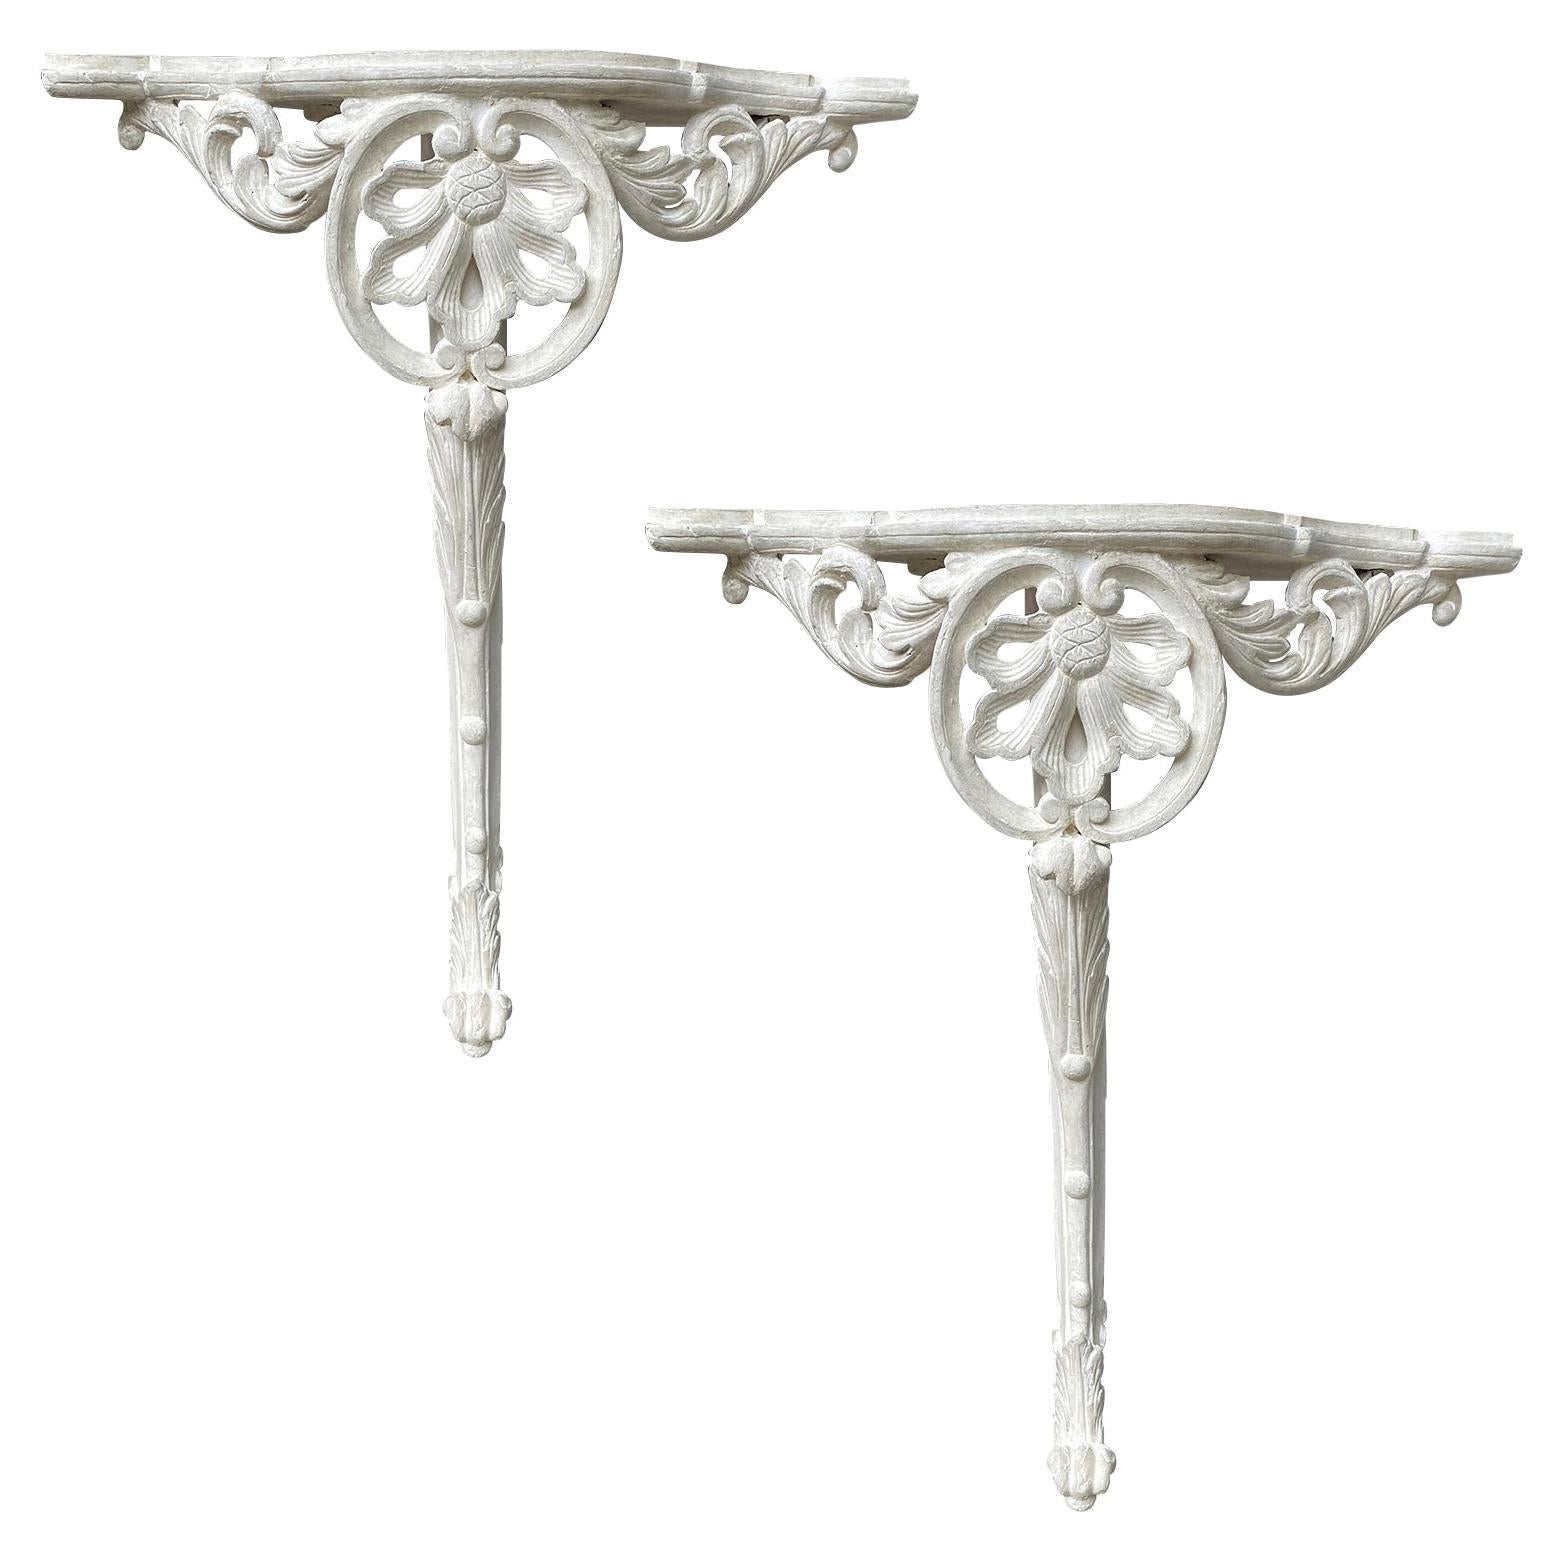 Pair of 18th or 19th Century Italian Painted Corner Wall Mount Console Tables